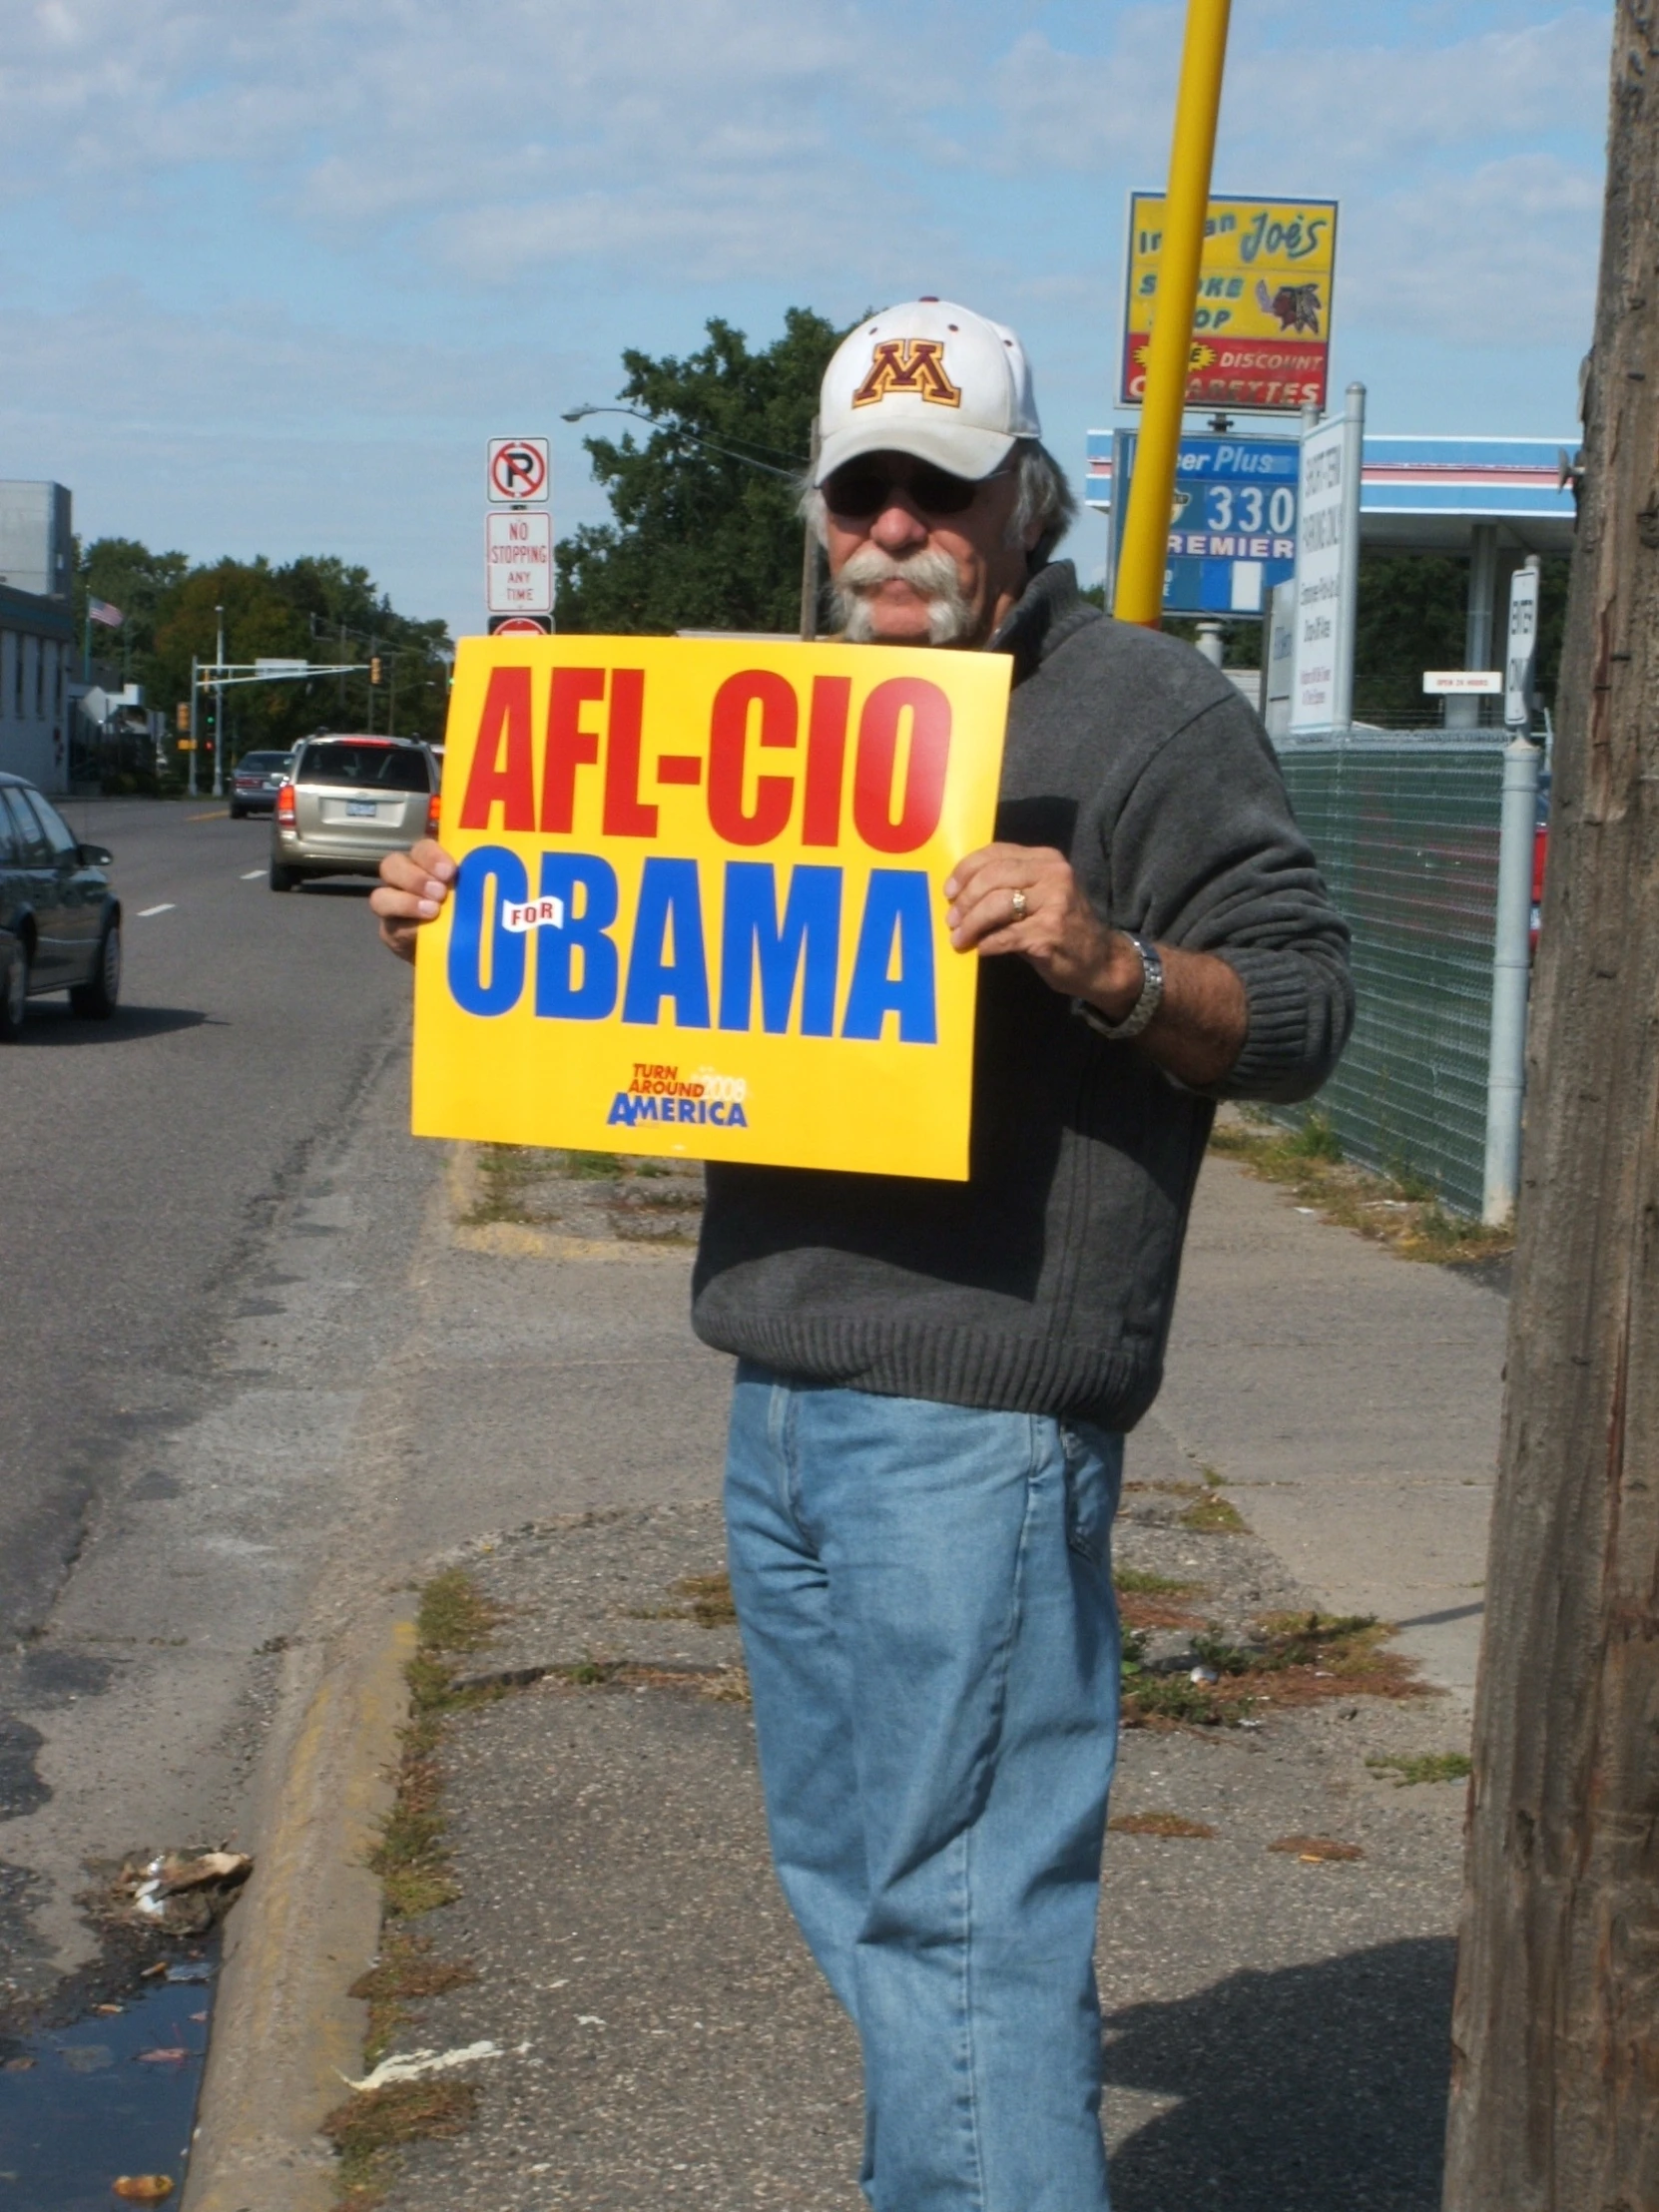 a man holding a sign in front of a street